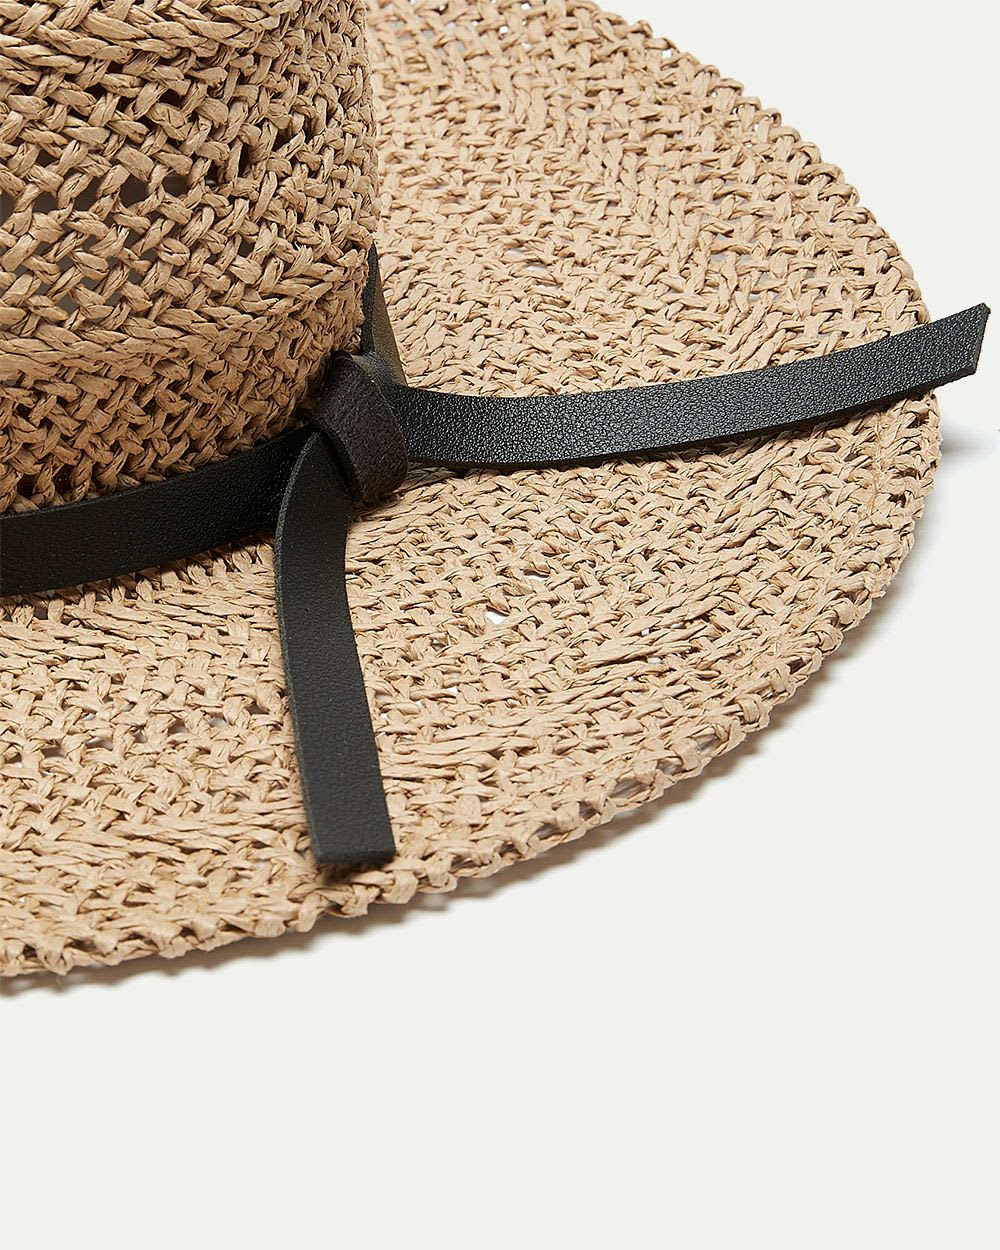 Structured Open Weave Fedora